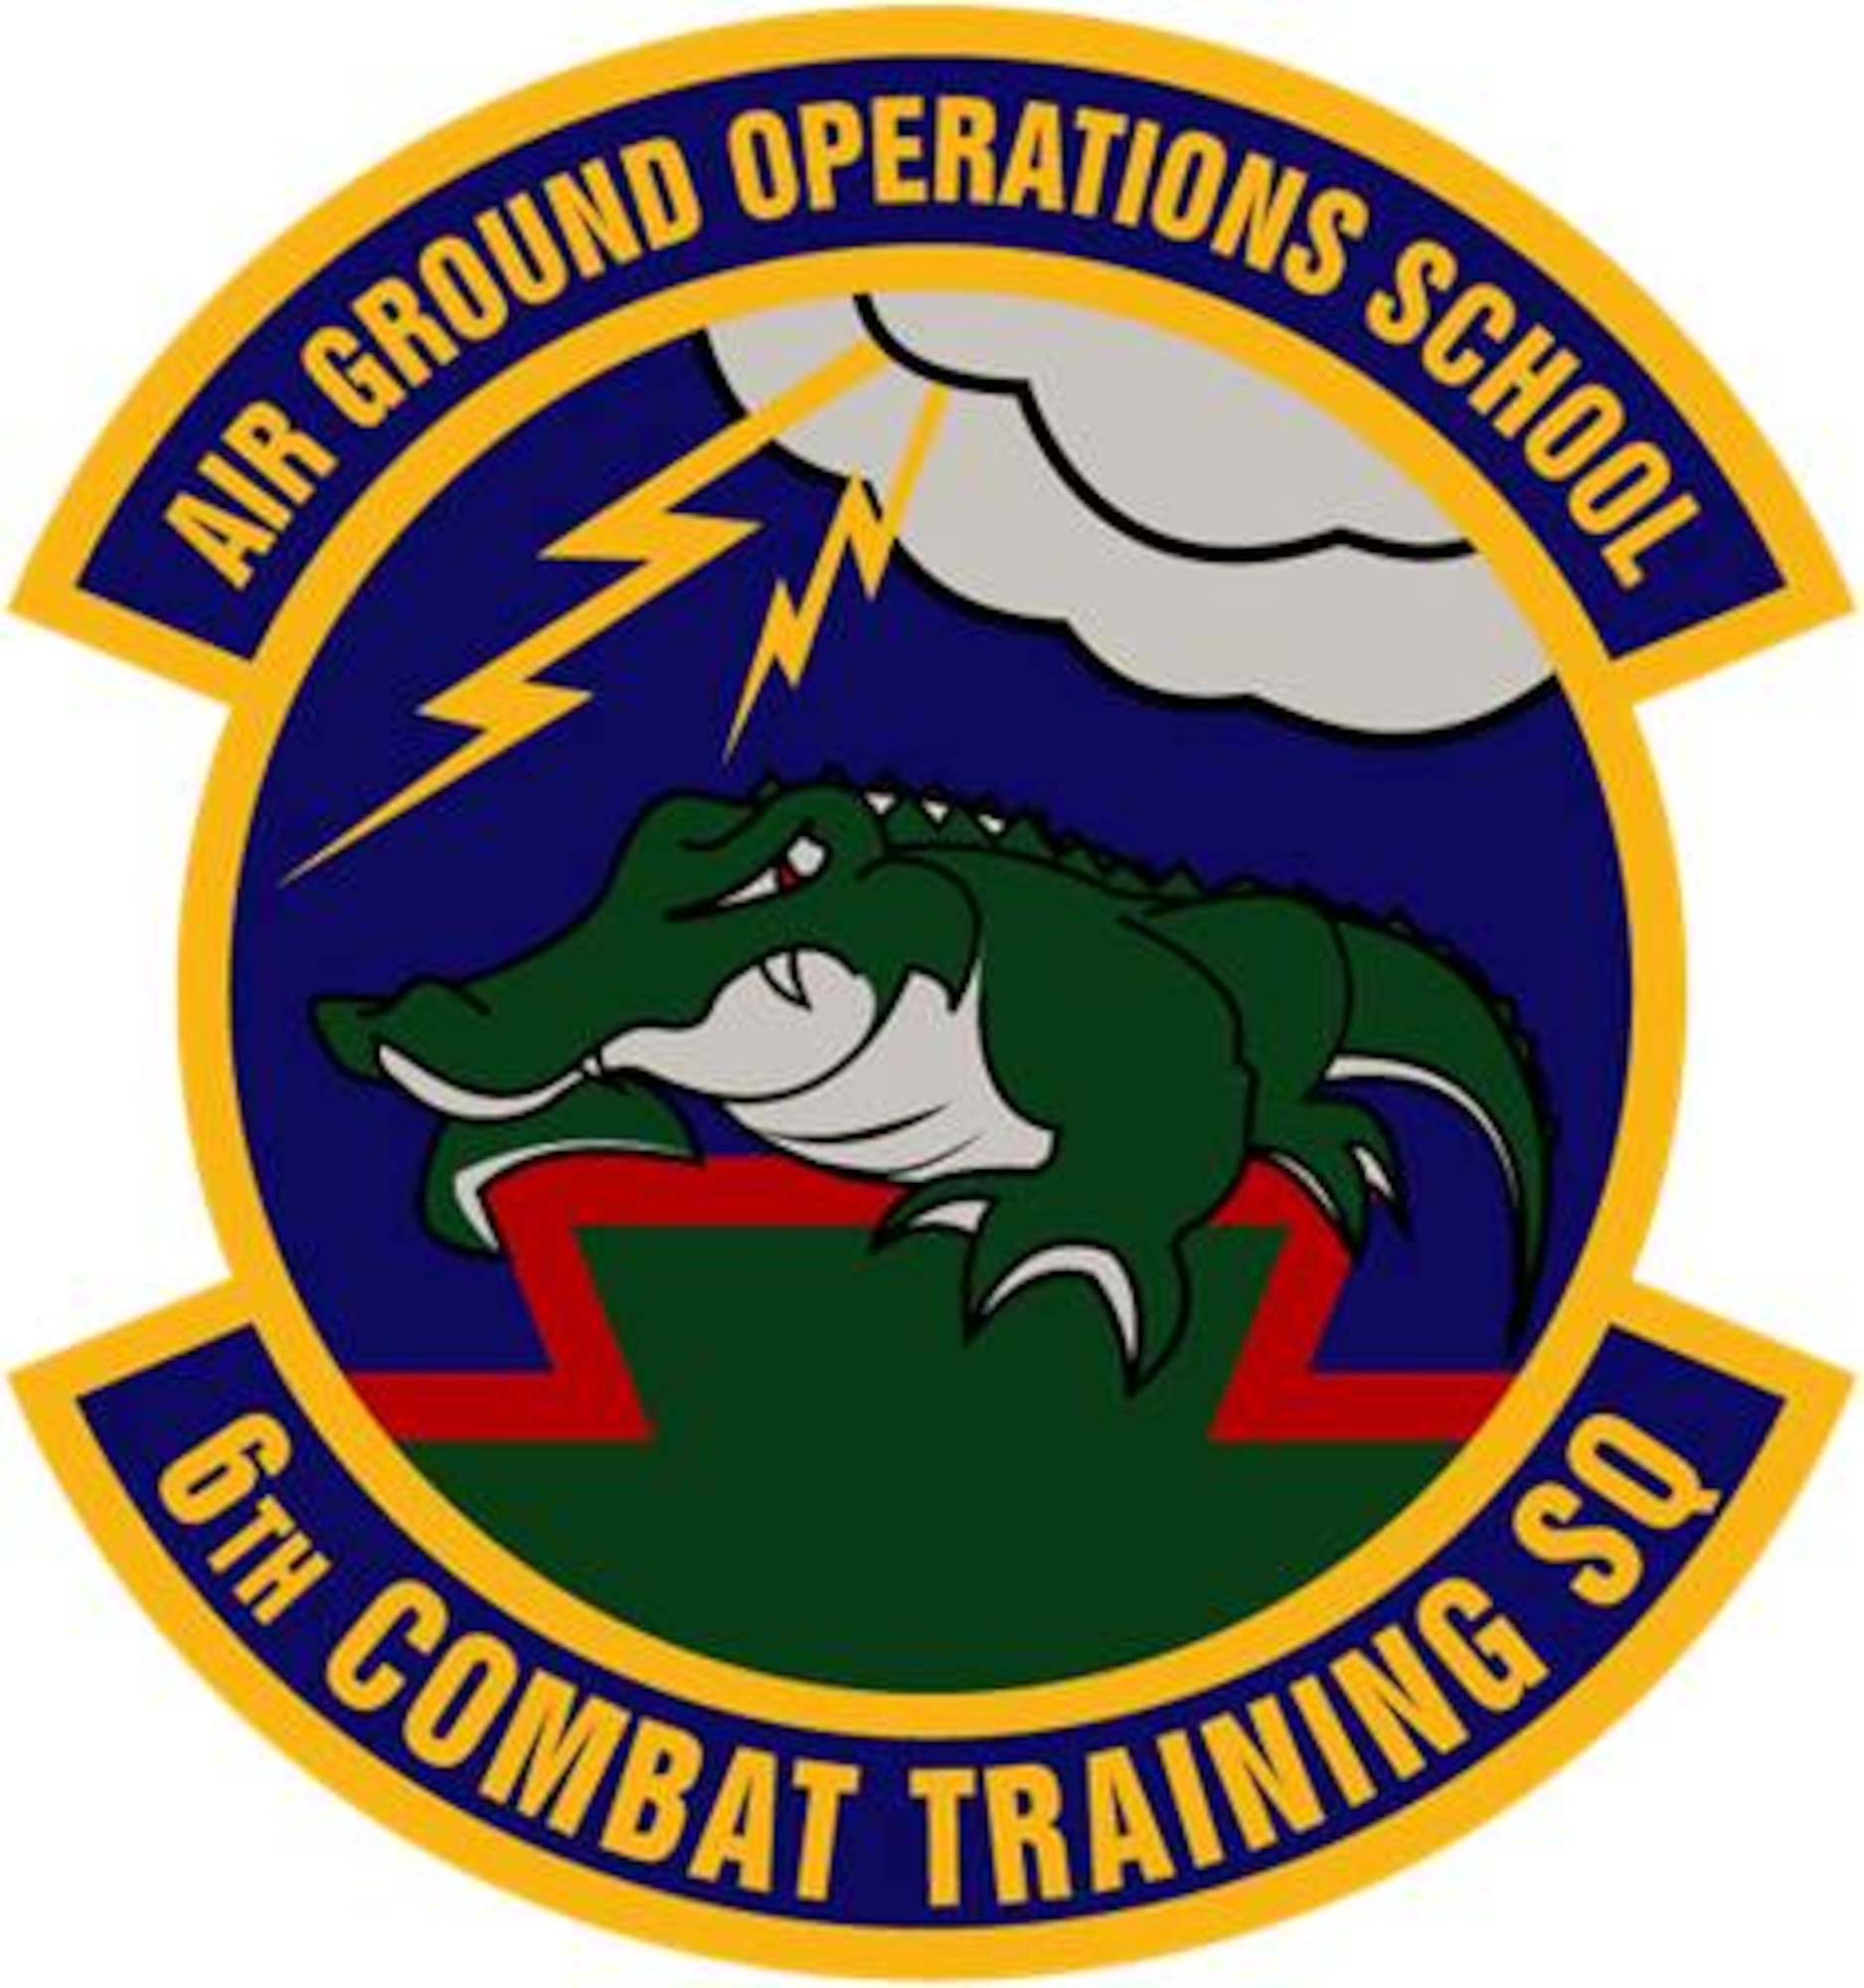 The emblem of the 6th Combat Training Squadron.